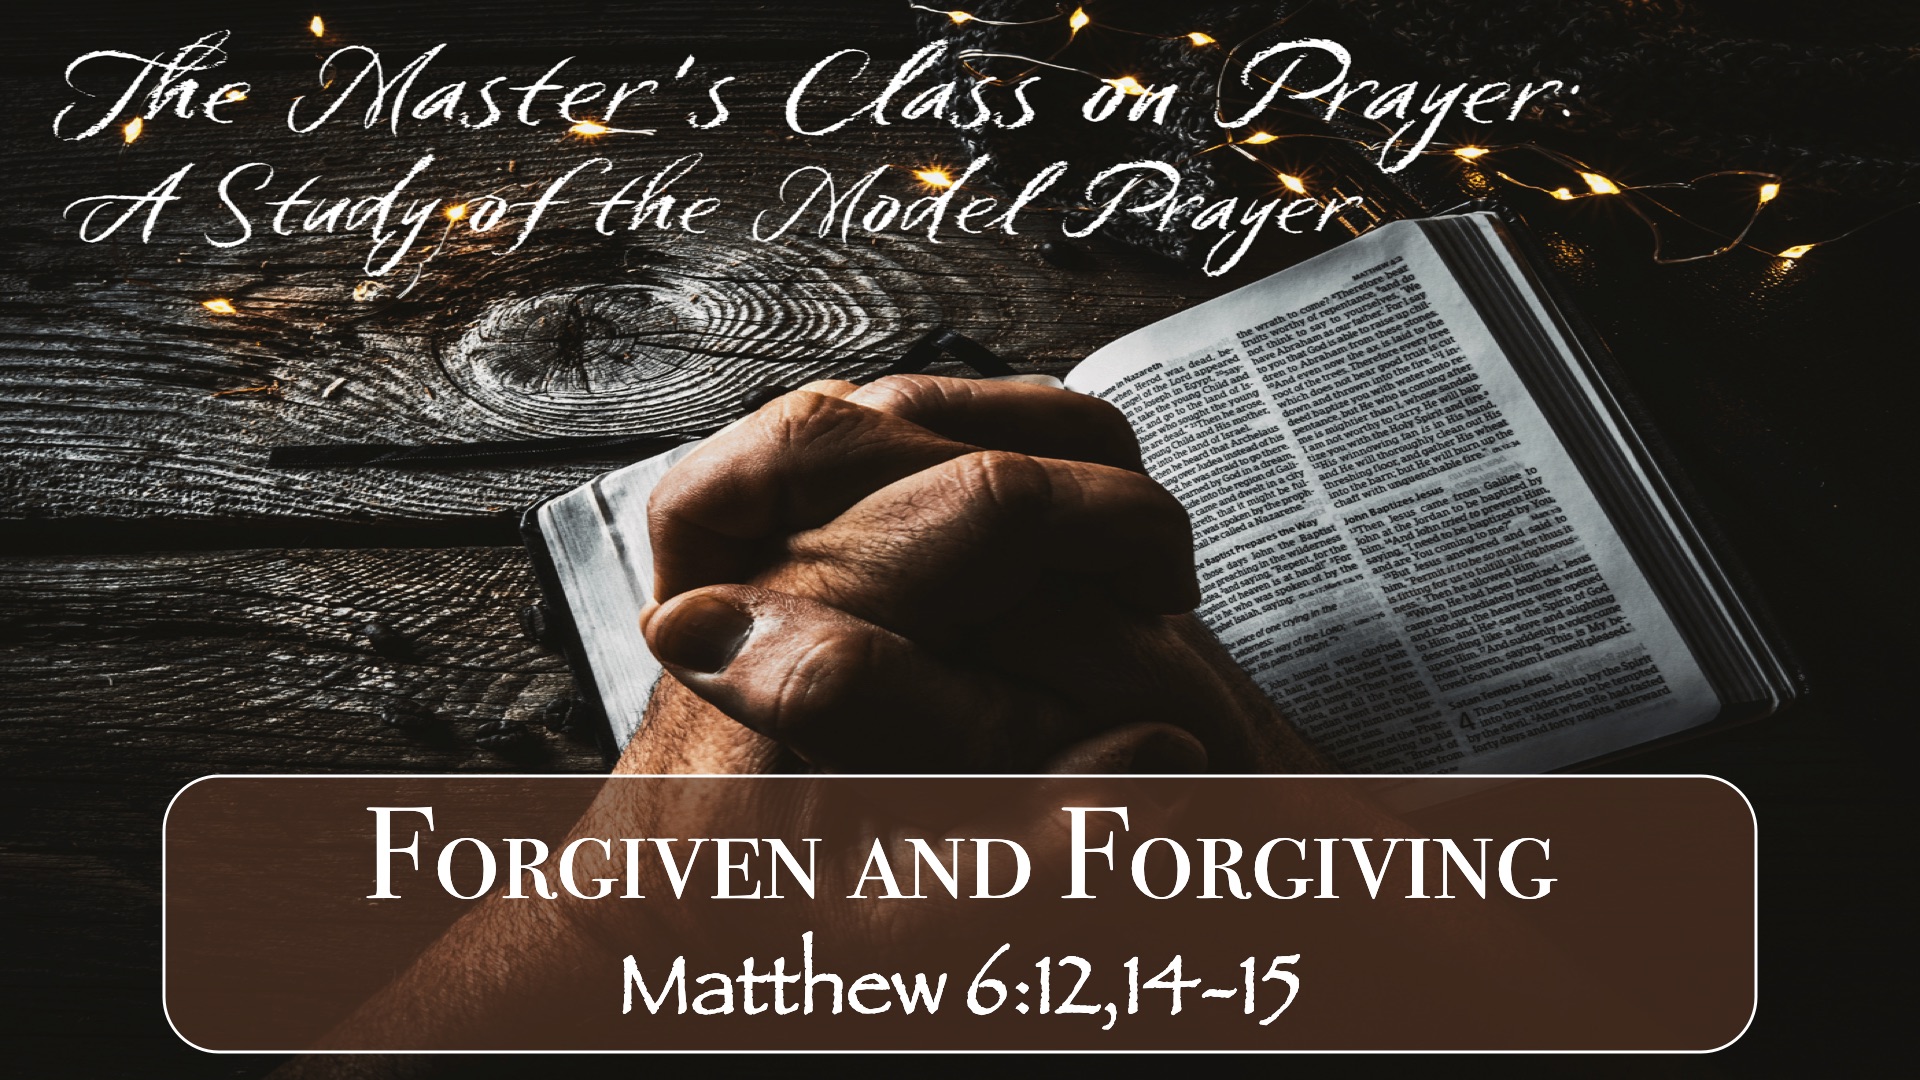 “Master’s Class on Prayer – Forgiven and Forgiving”